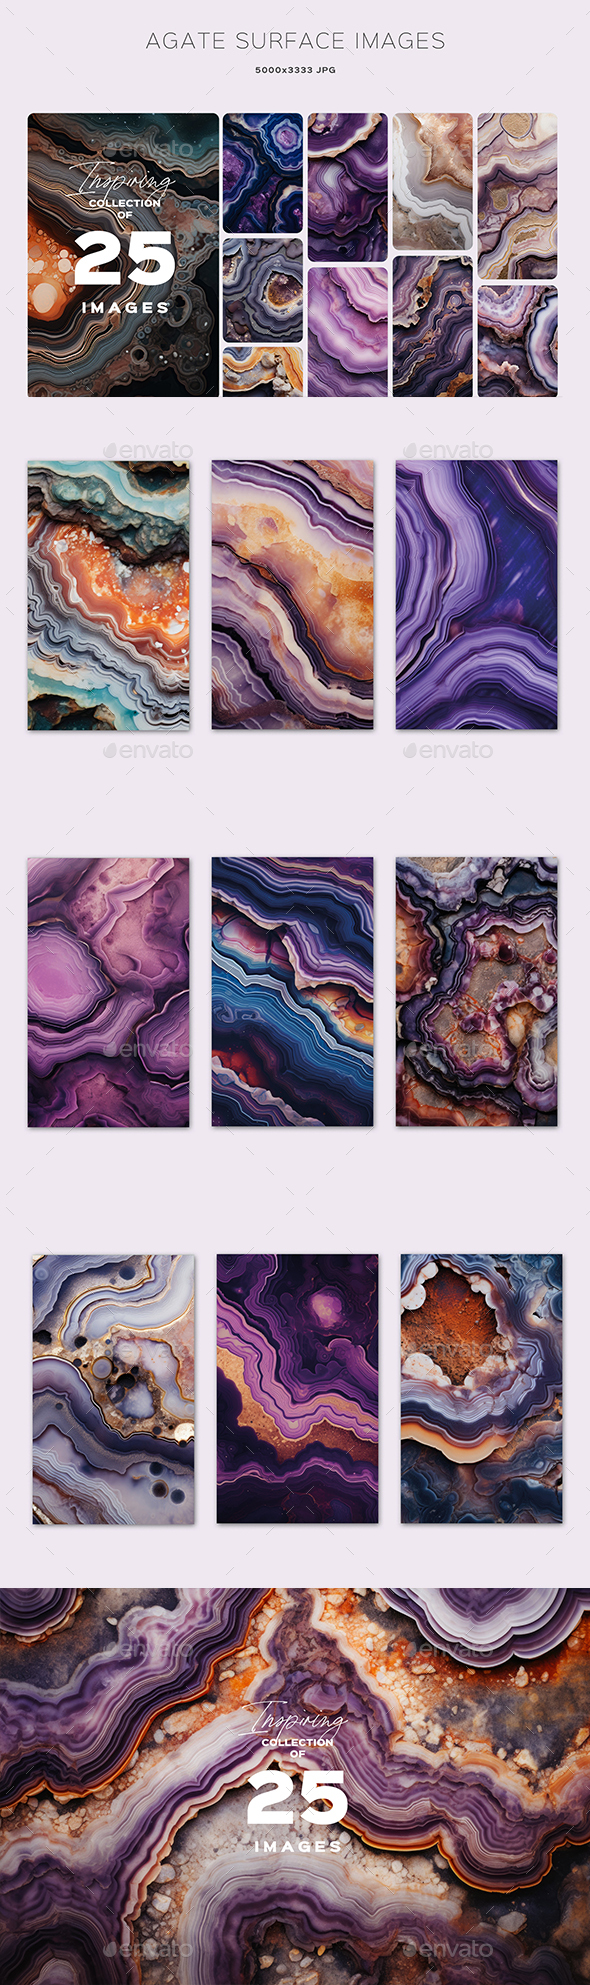 [DOWNLOAD]Agate Surface Images